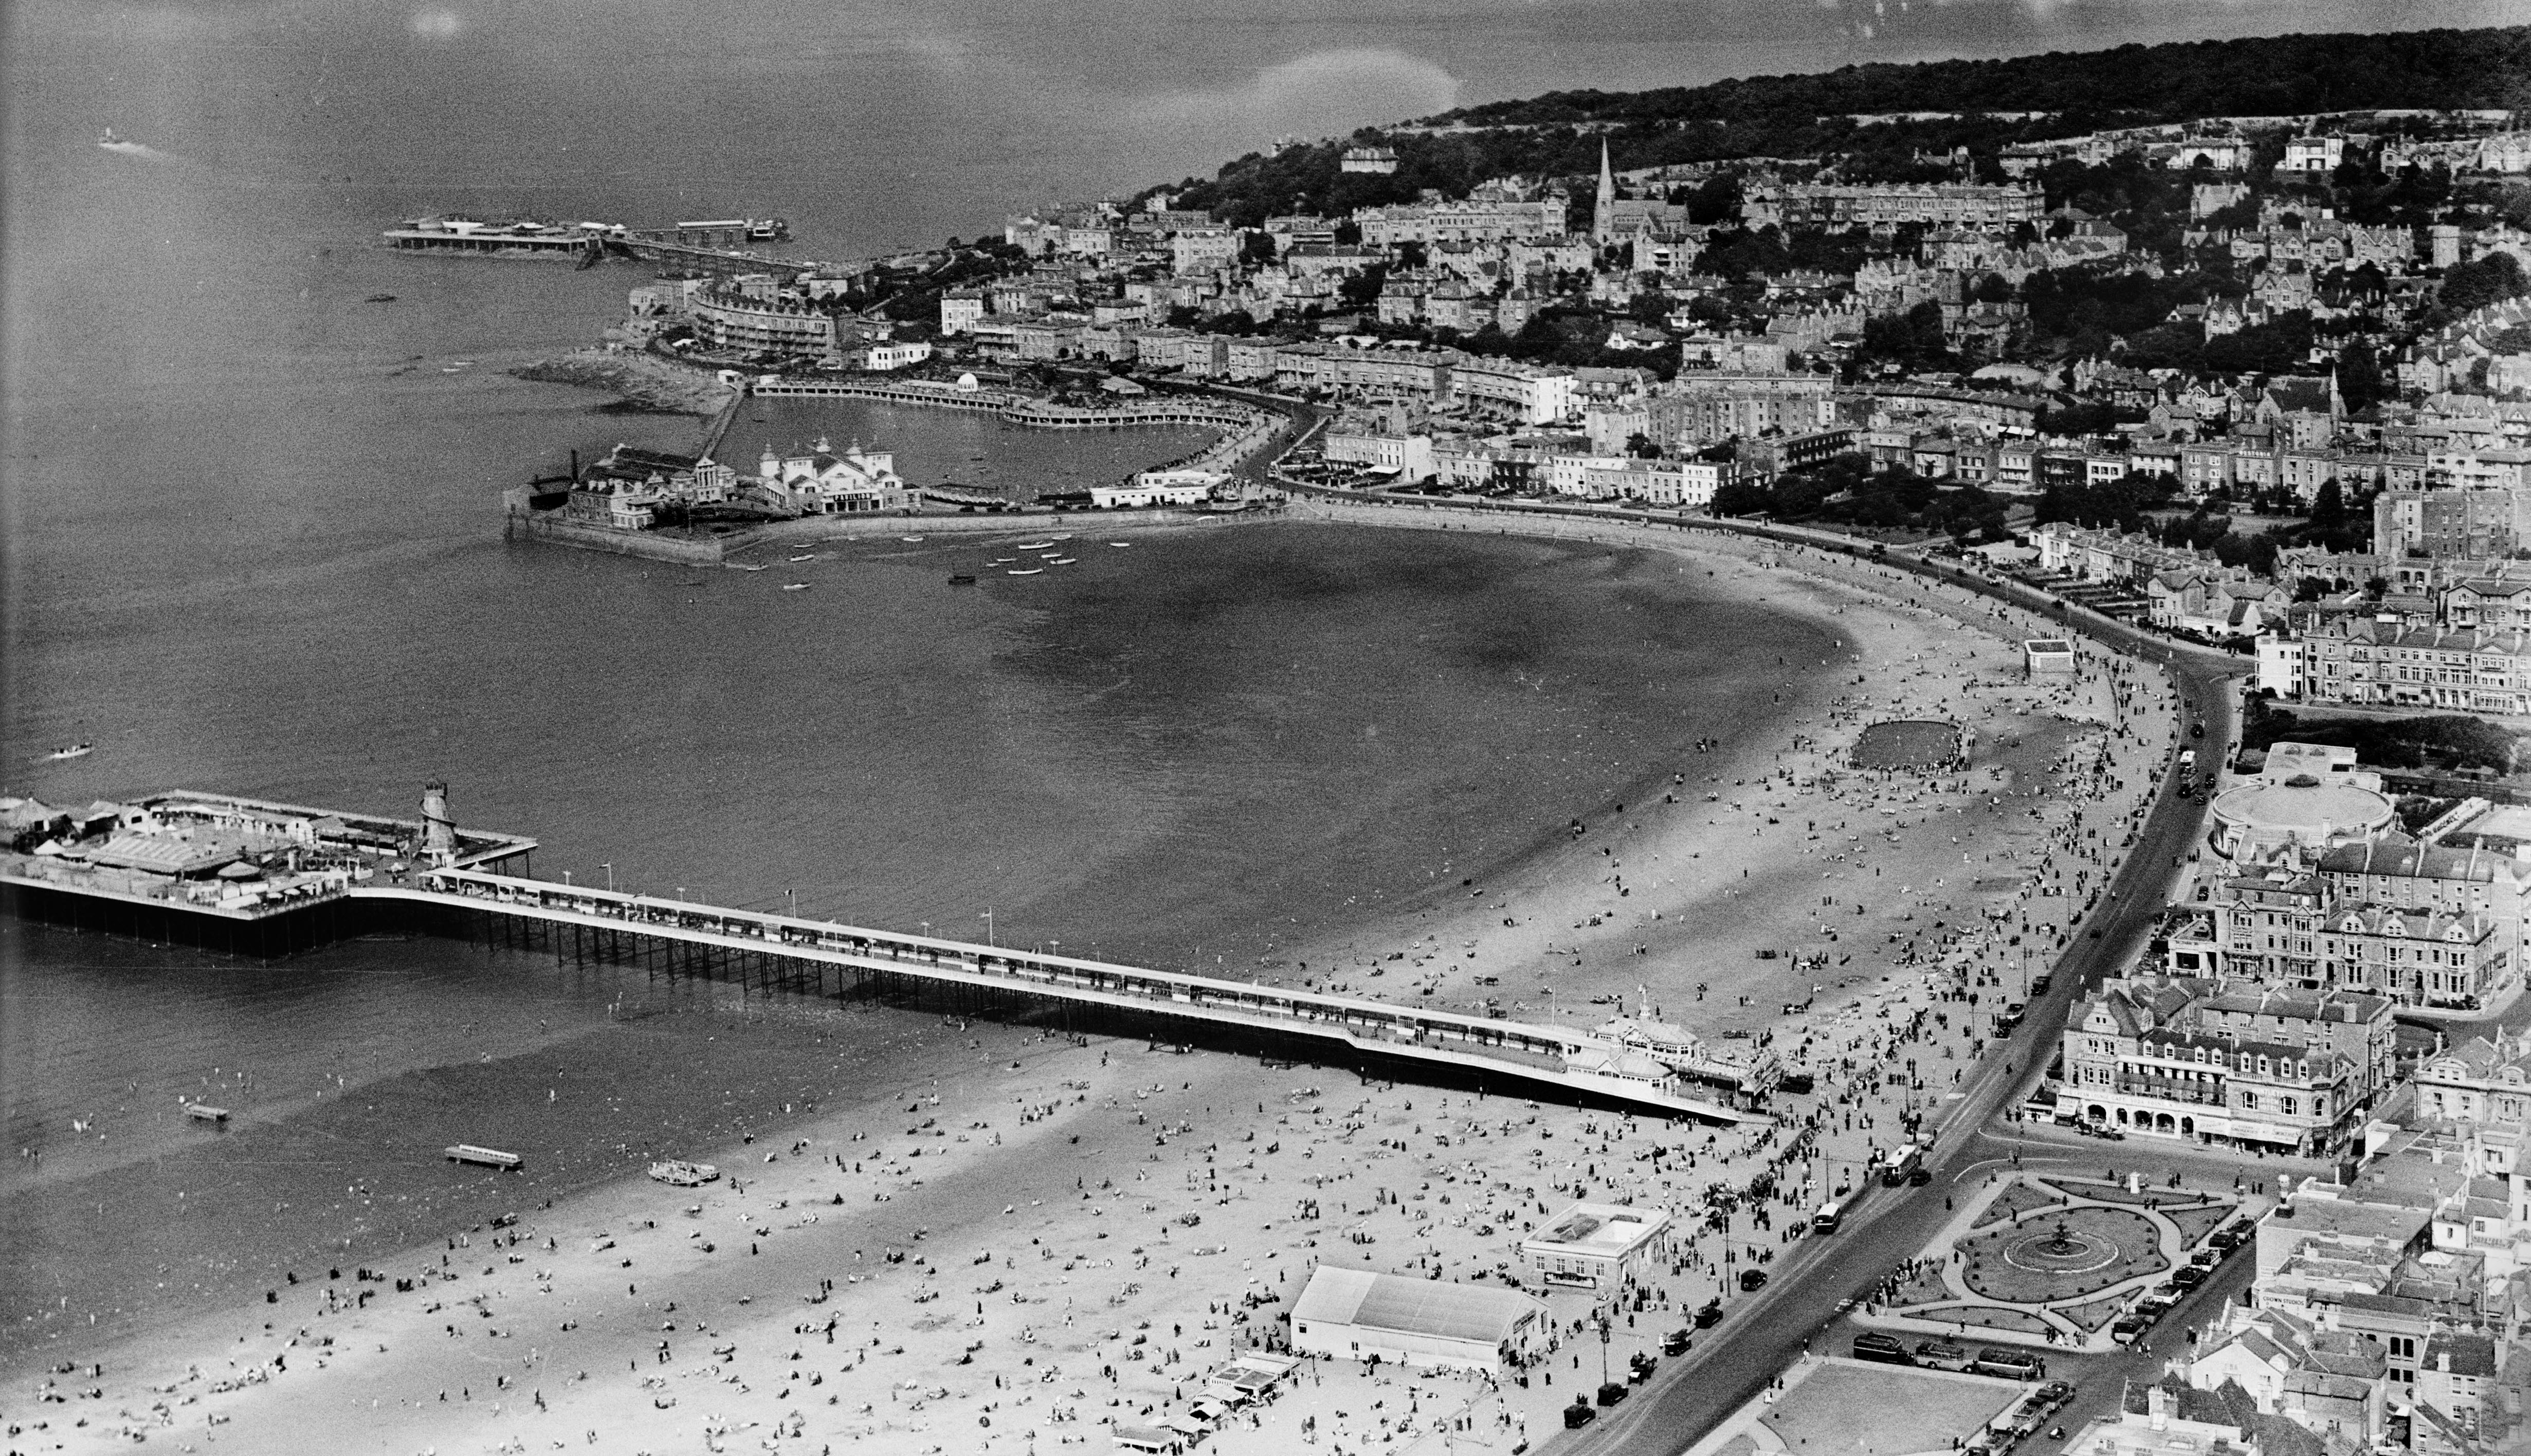 An aerial view of a beach, pier and seafront amusements.